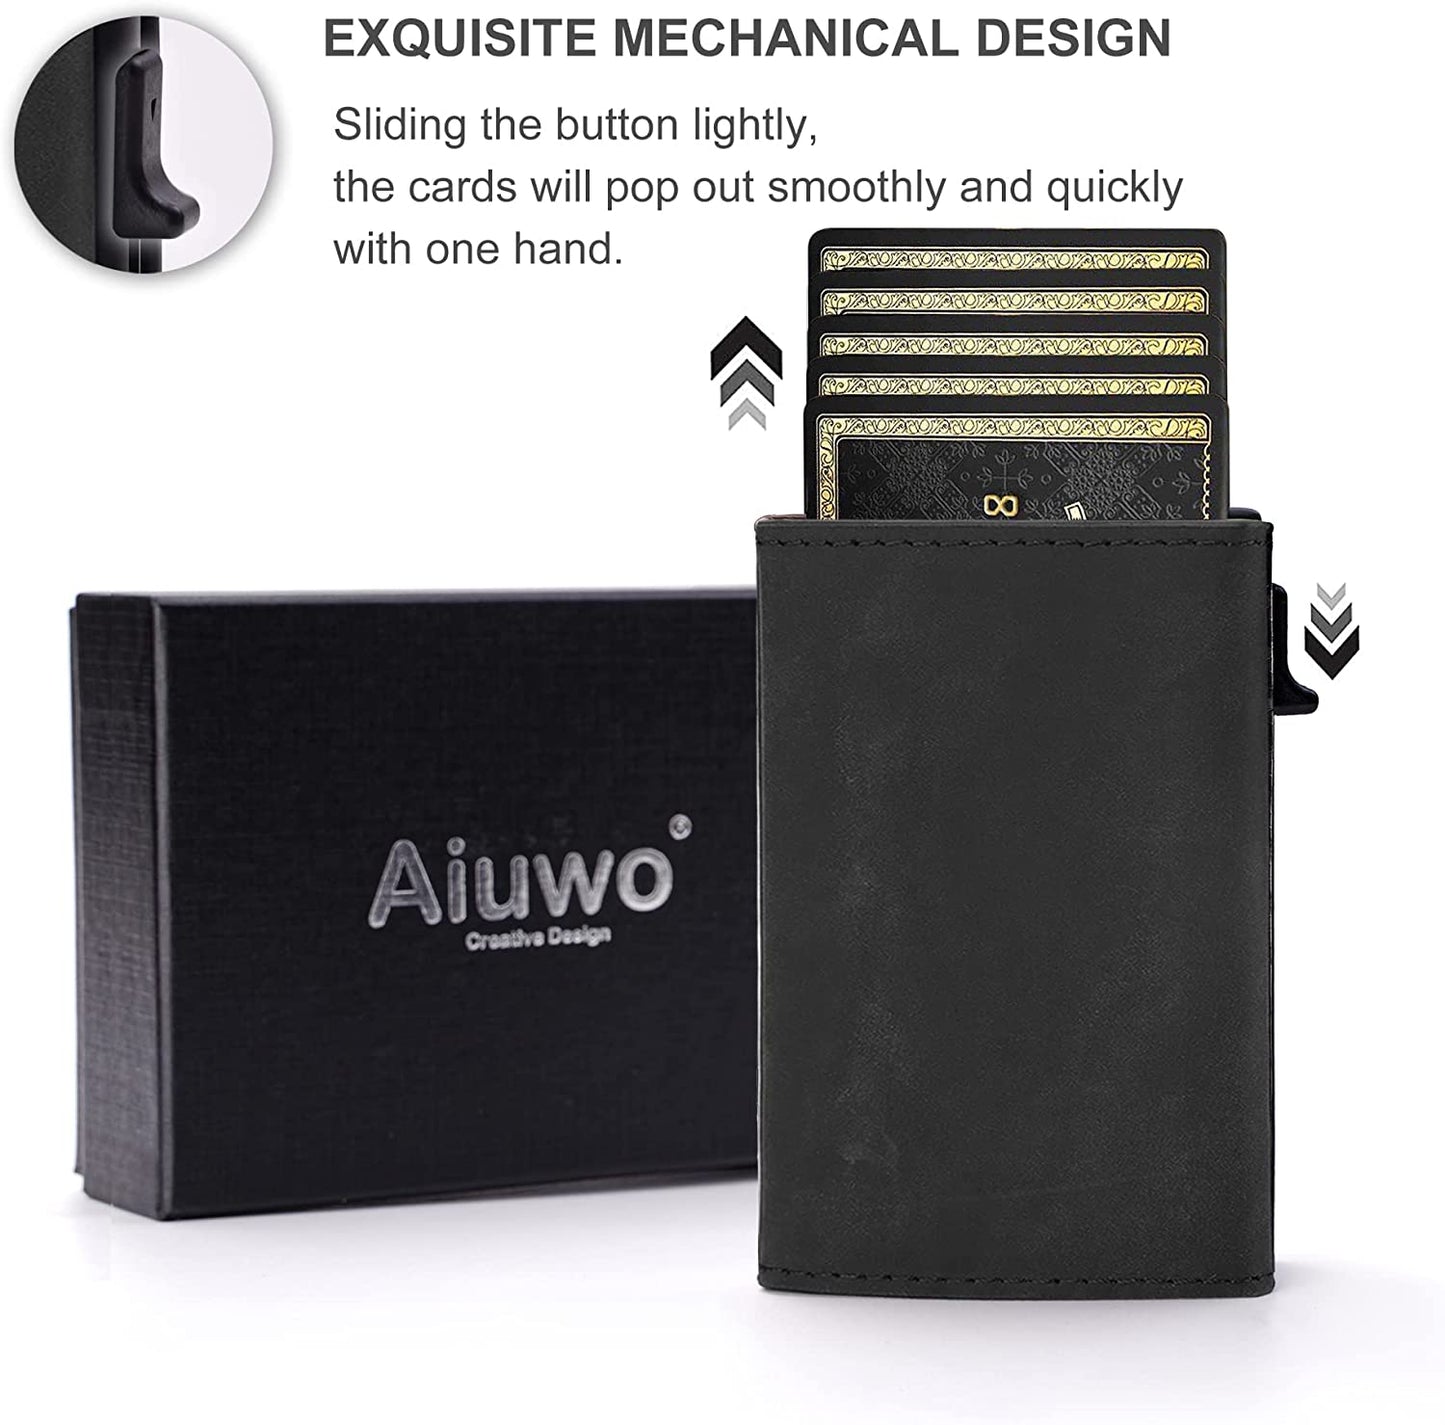 Aiuwo Mens Slim wallet with Money Clip RFID Blocking Credit Card holder Minimalist wallet for Men with Gift Box (Carbon Leather)